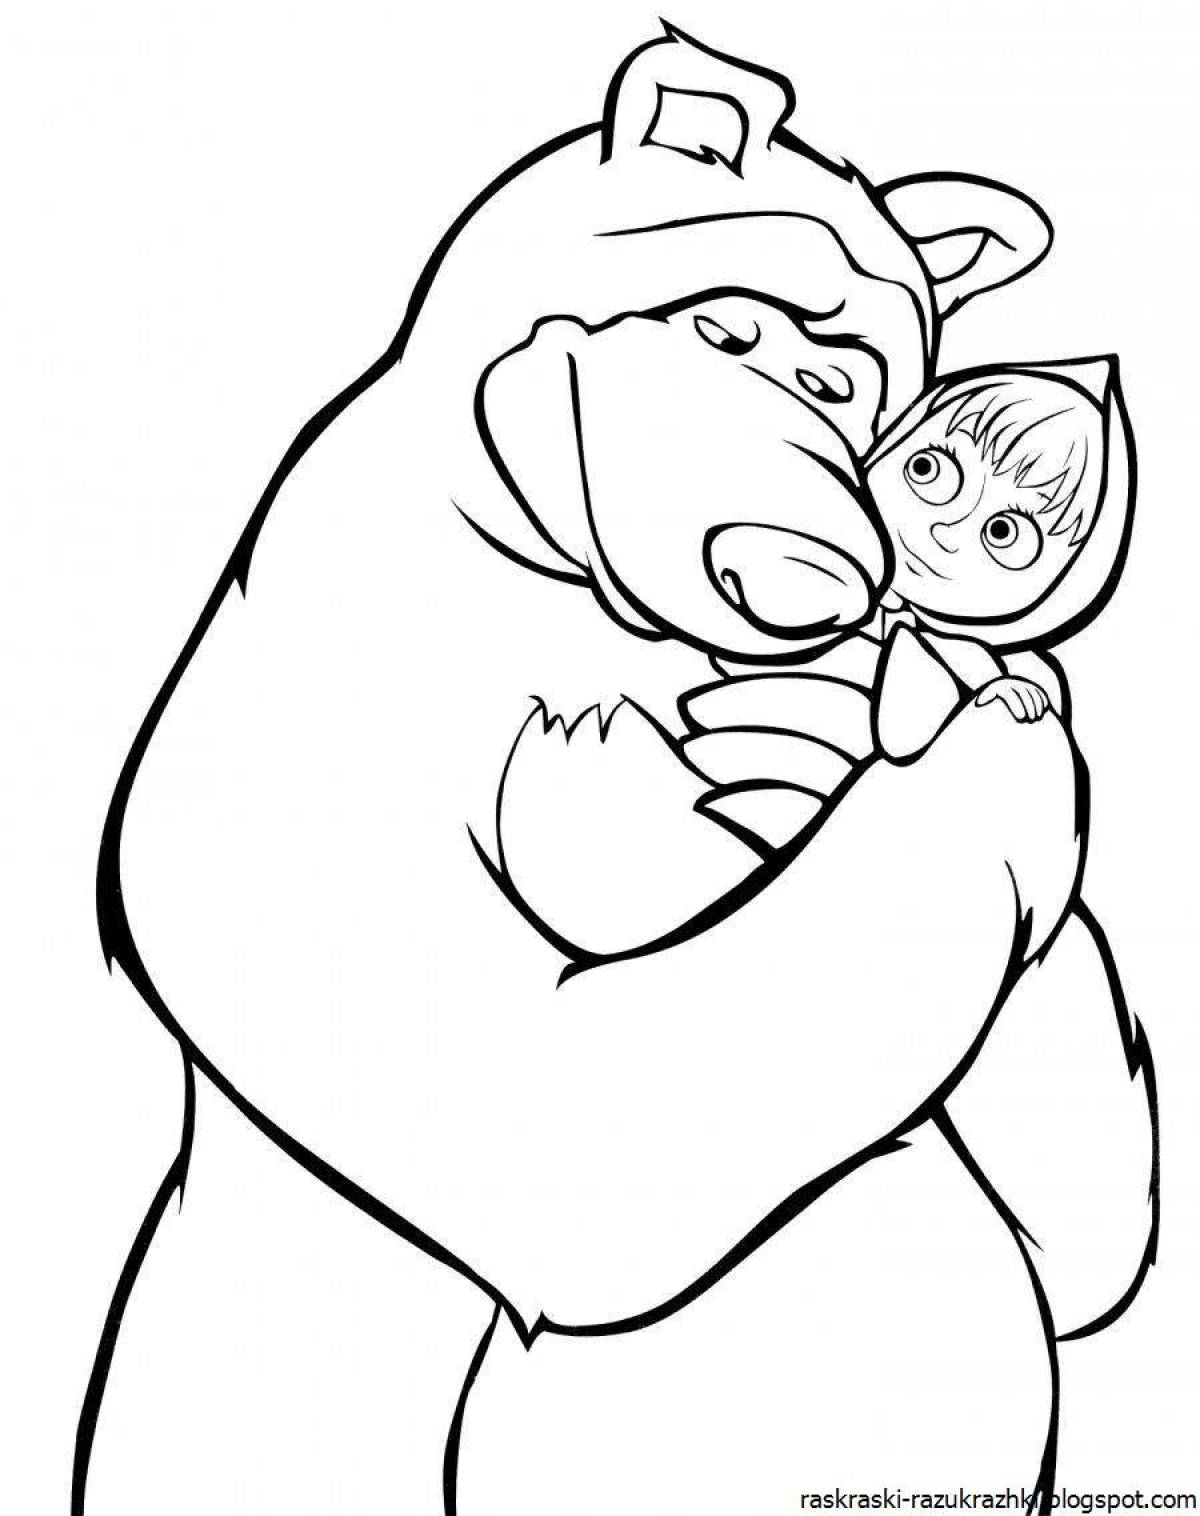 Playful masha and the bear coloring pages for kids